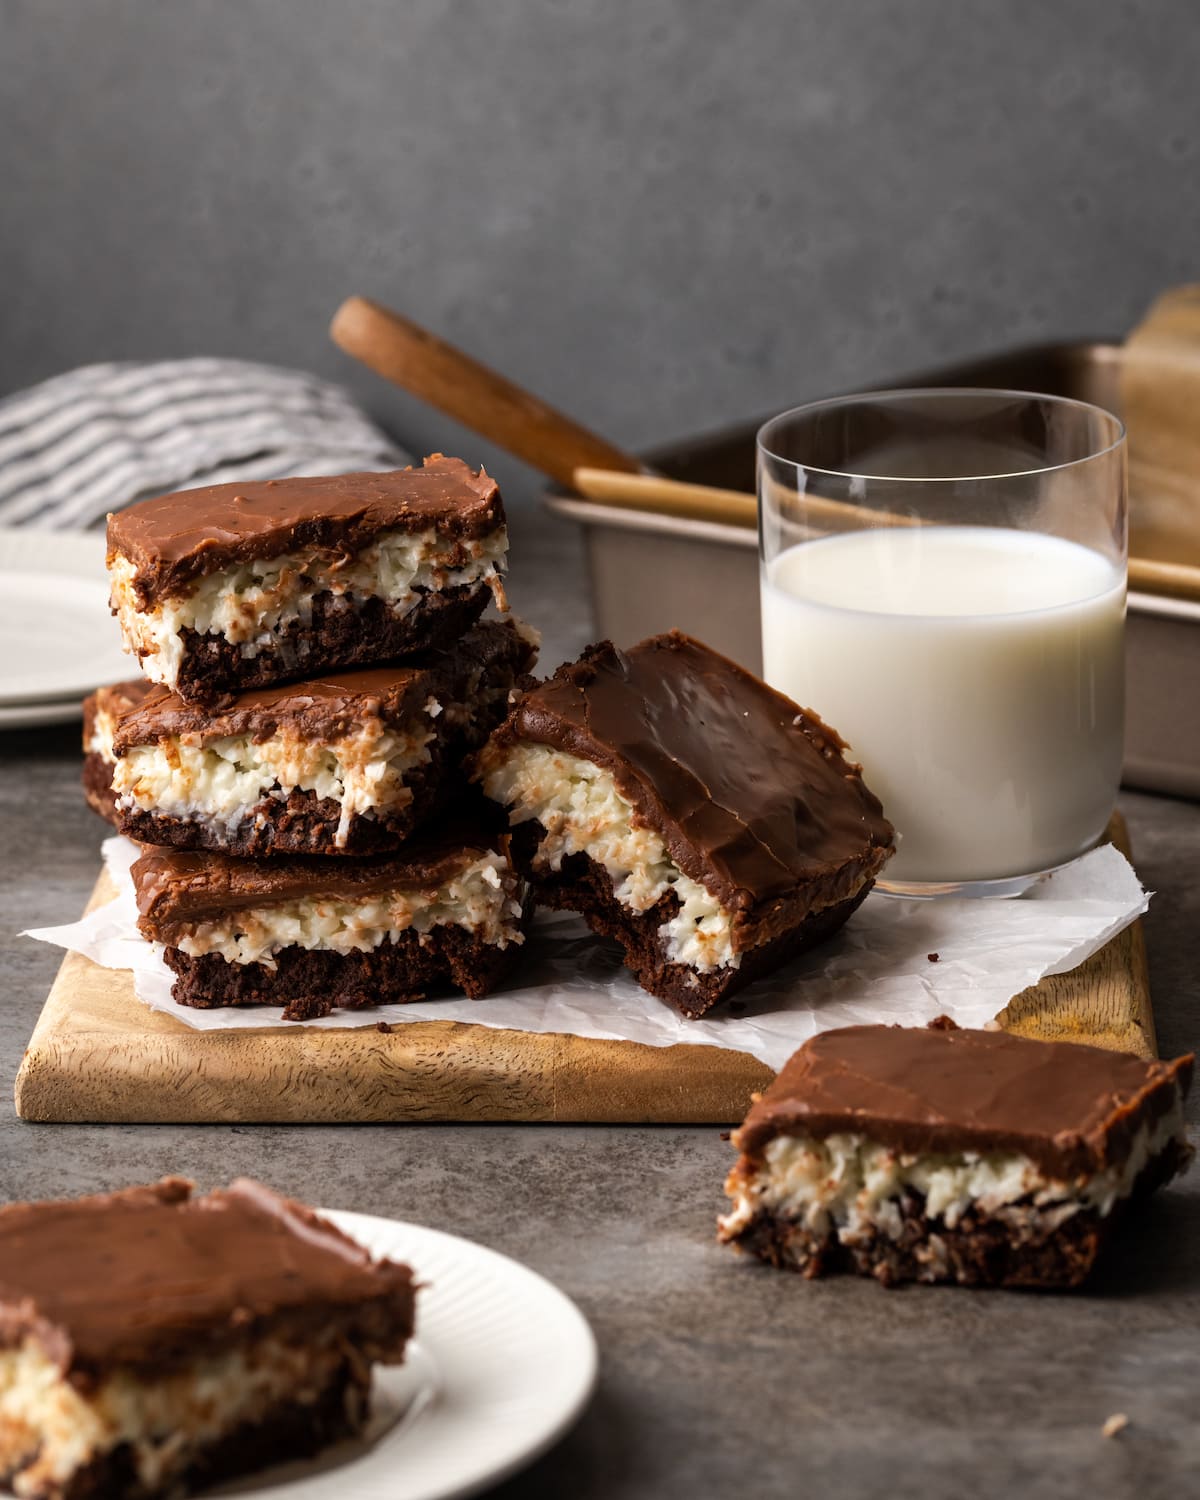 A stack of coconut brownies on a wooden platter next to a glass of milk, with a pan of brownies in the background.